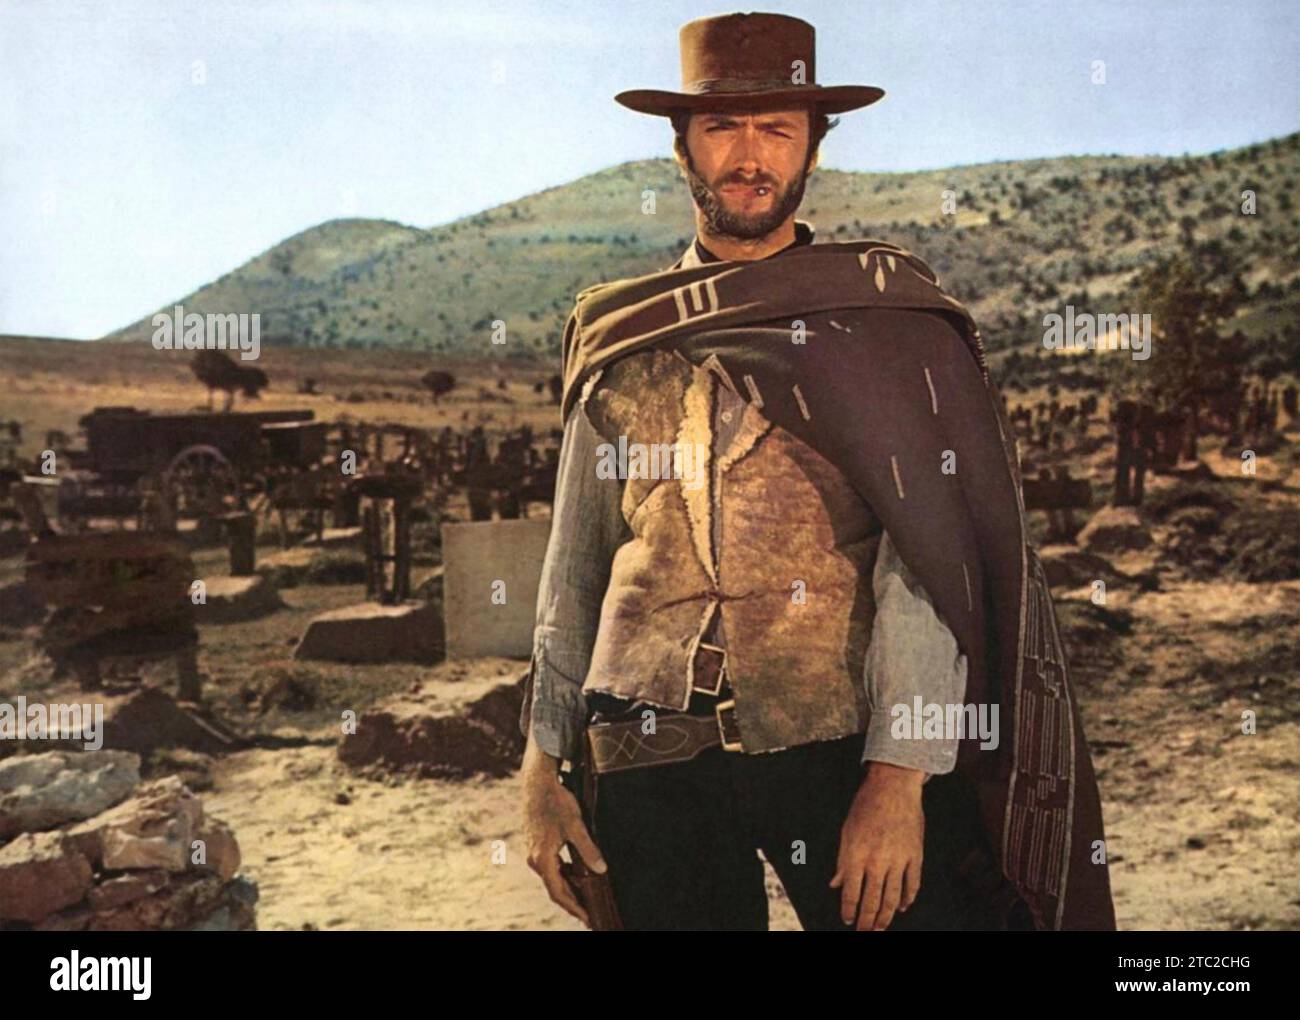 THE GOOD, THE BAD AND THE UGLY 1966 United Artists Film mit Clint Eastwood Stockfoto